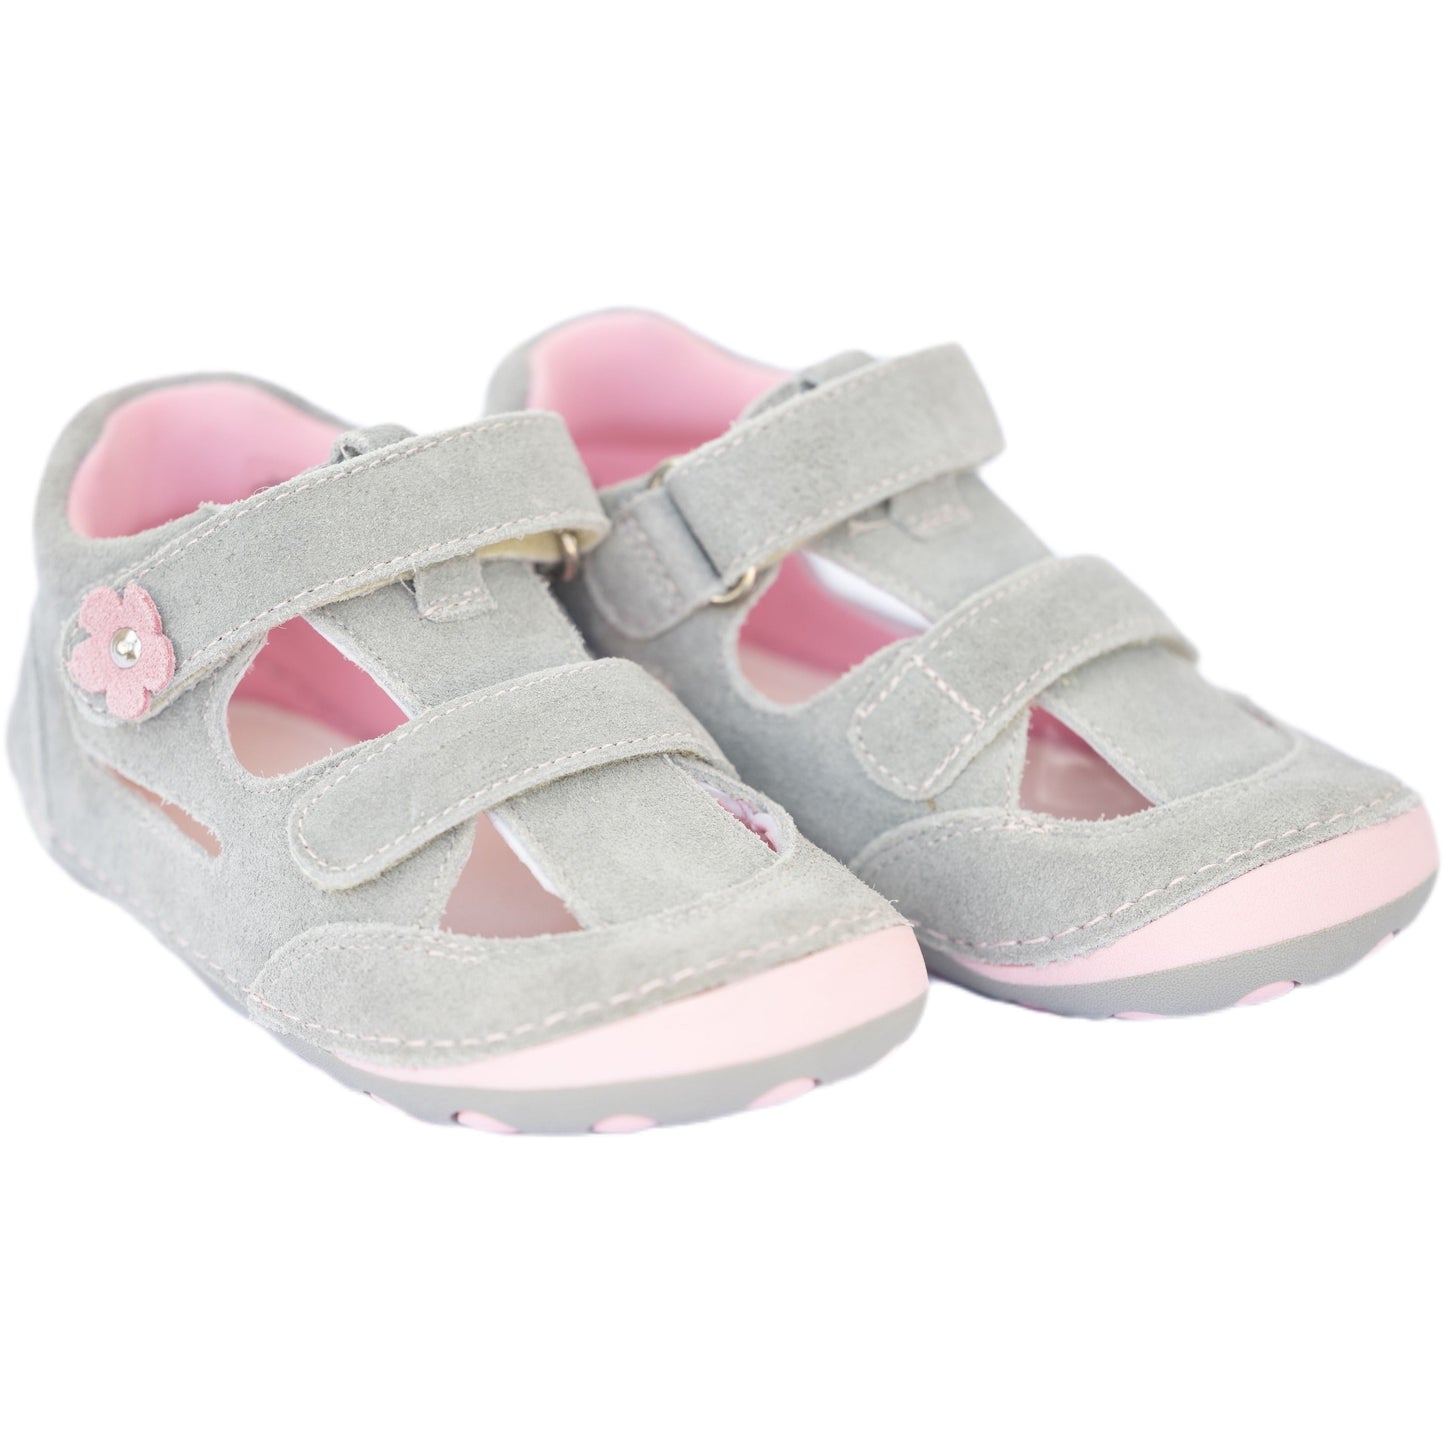 Barefoot sneakers for toddlers girls, made from suede leather, Protetika brand.